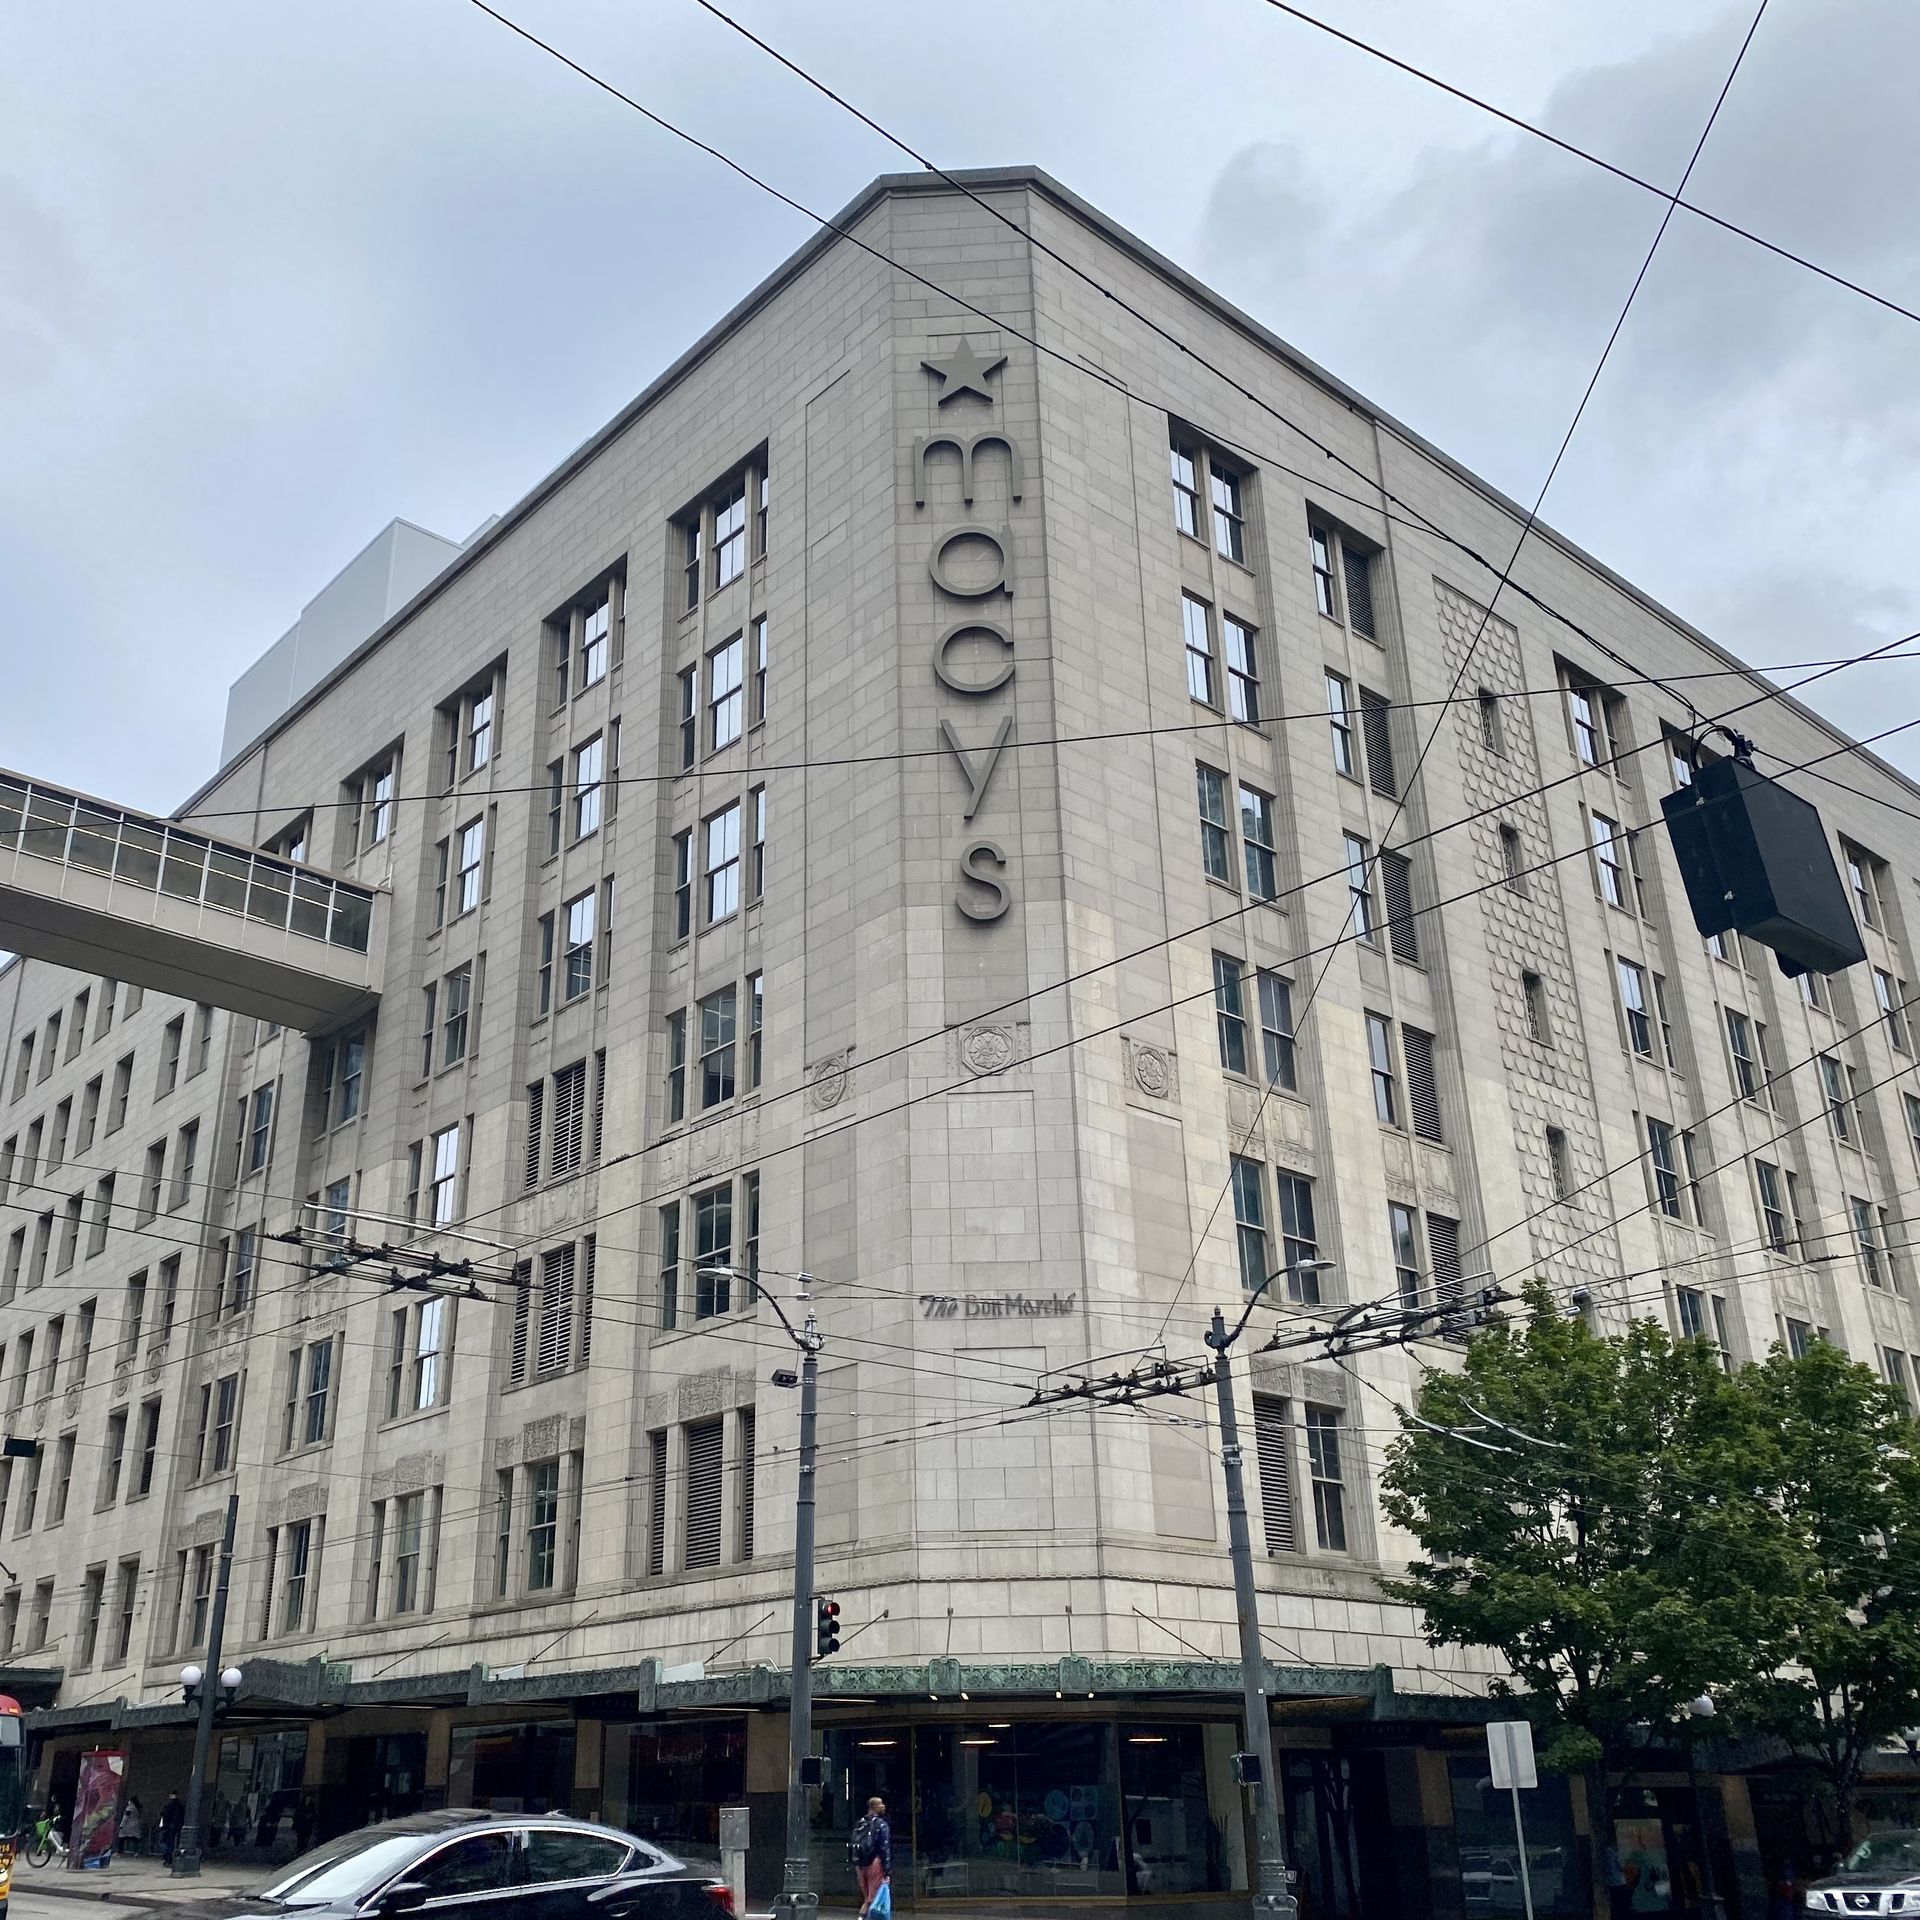 A grey building with letters spelling "Macy's" displayed vertically on the building corner.